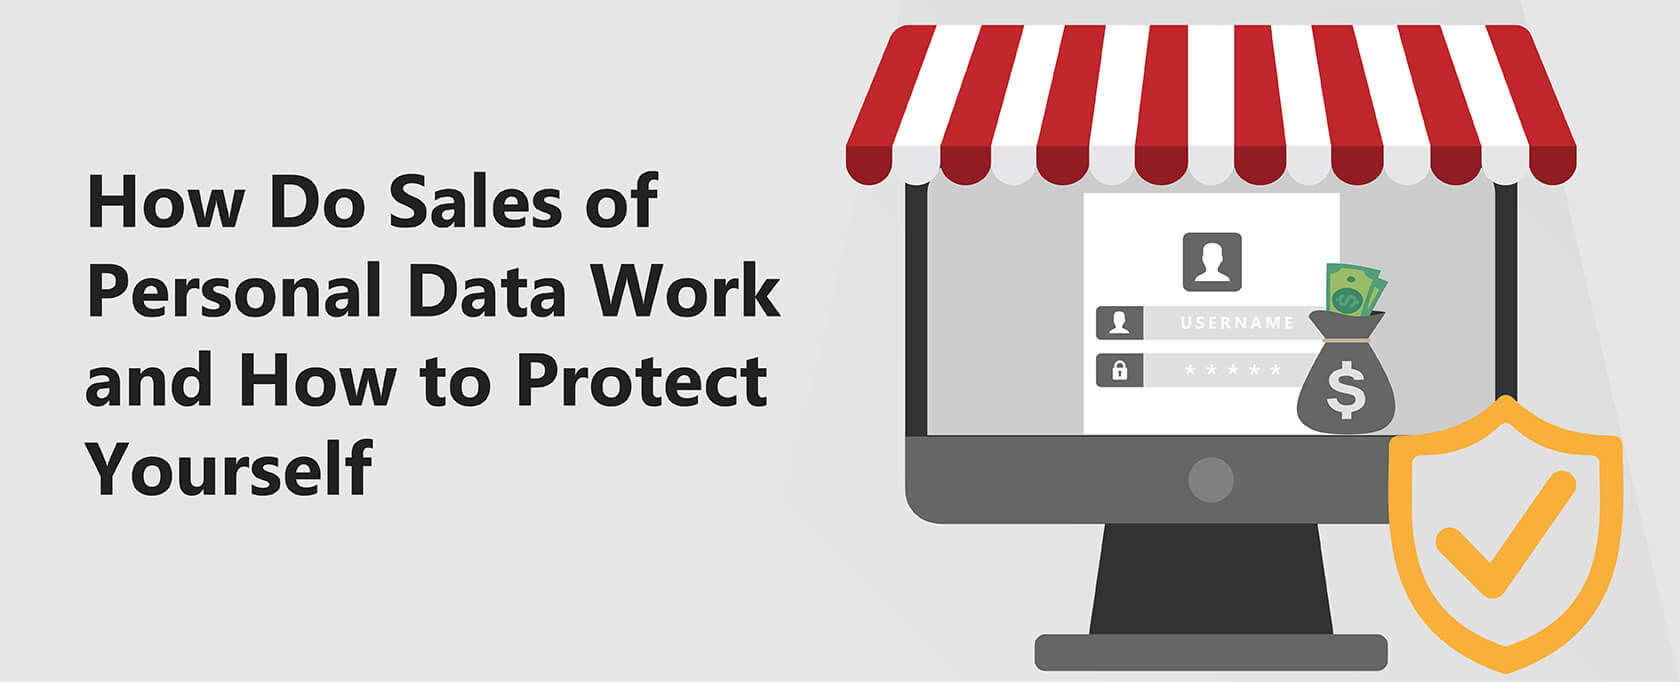 How Do Sales of Personal Data Work and How to Protect Yourself